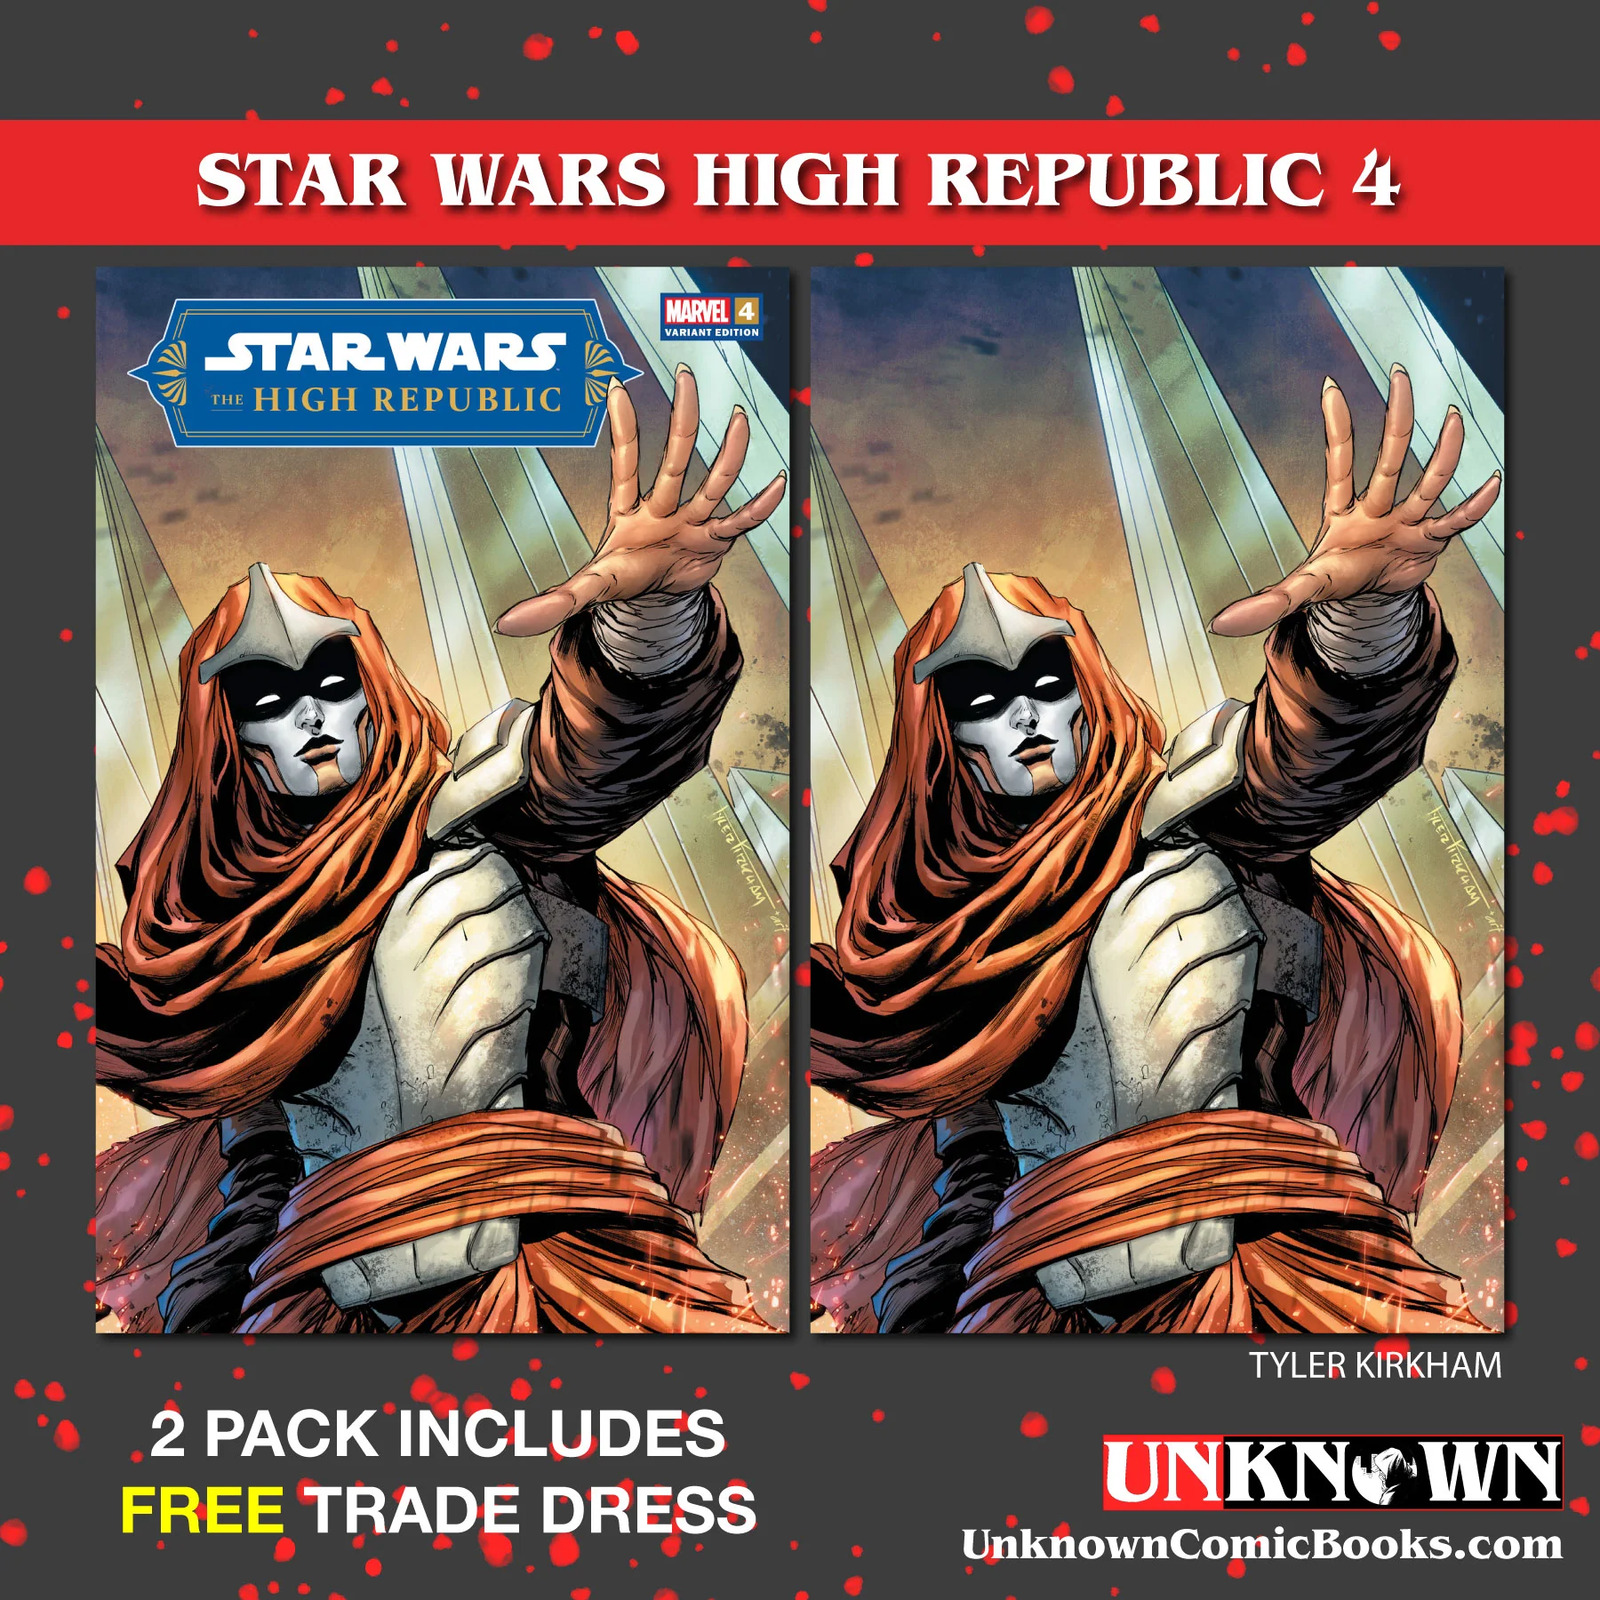 [2 PACK] **FREE TRADE DRESS** STAR WARS: THE HIGH REPUBLIC #4 UNKNOWN COMICS TYL